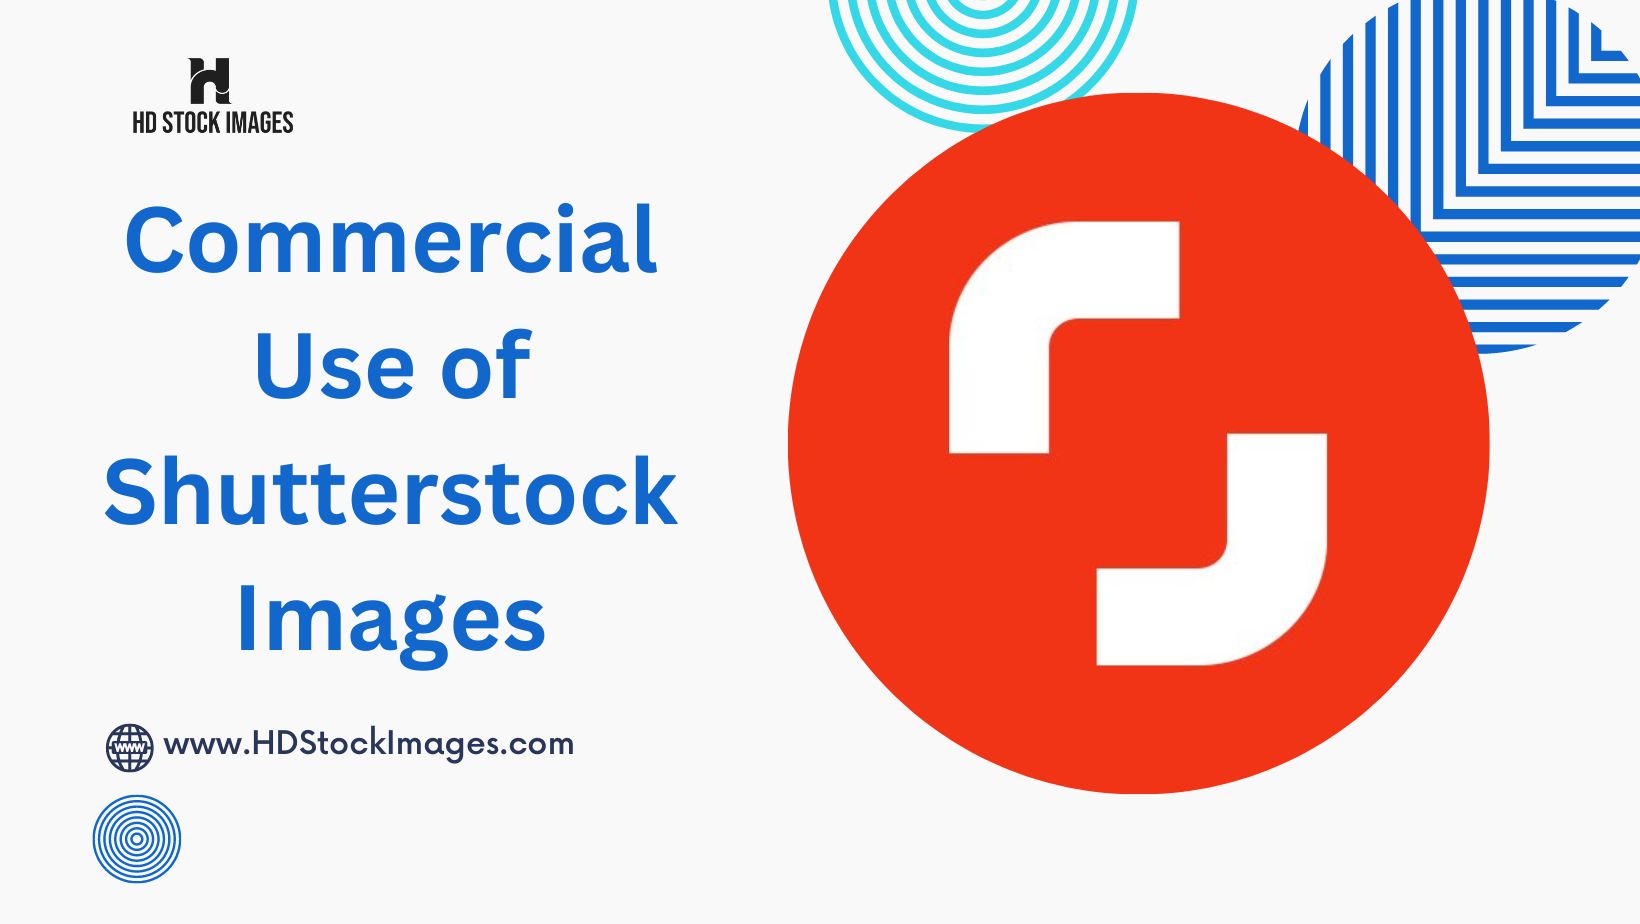 An image of Commercial Use of Shutterstock Images: